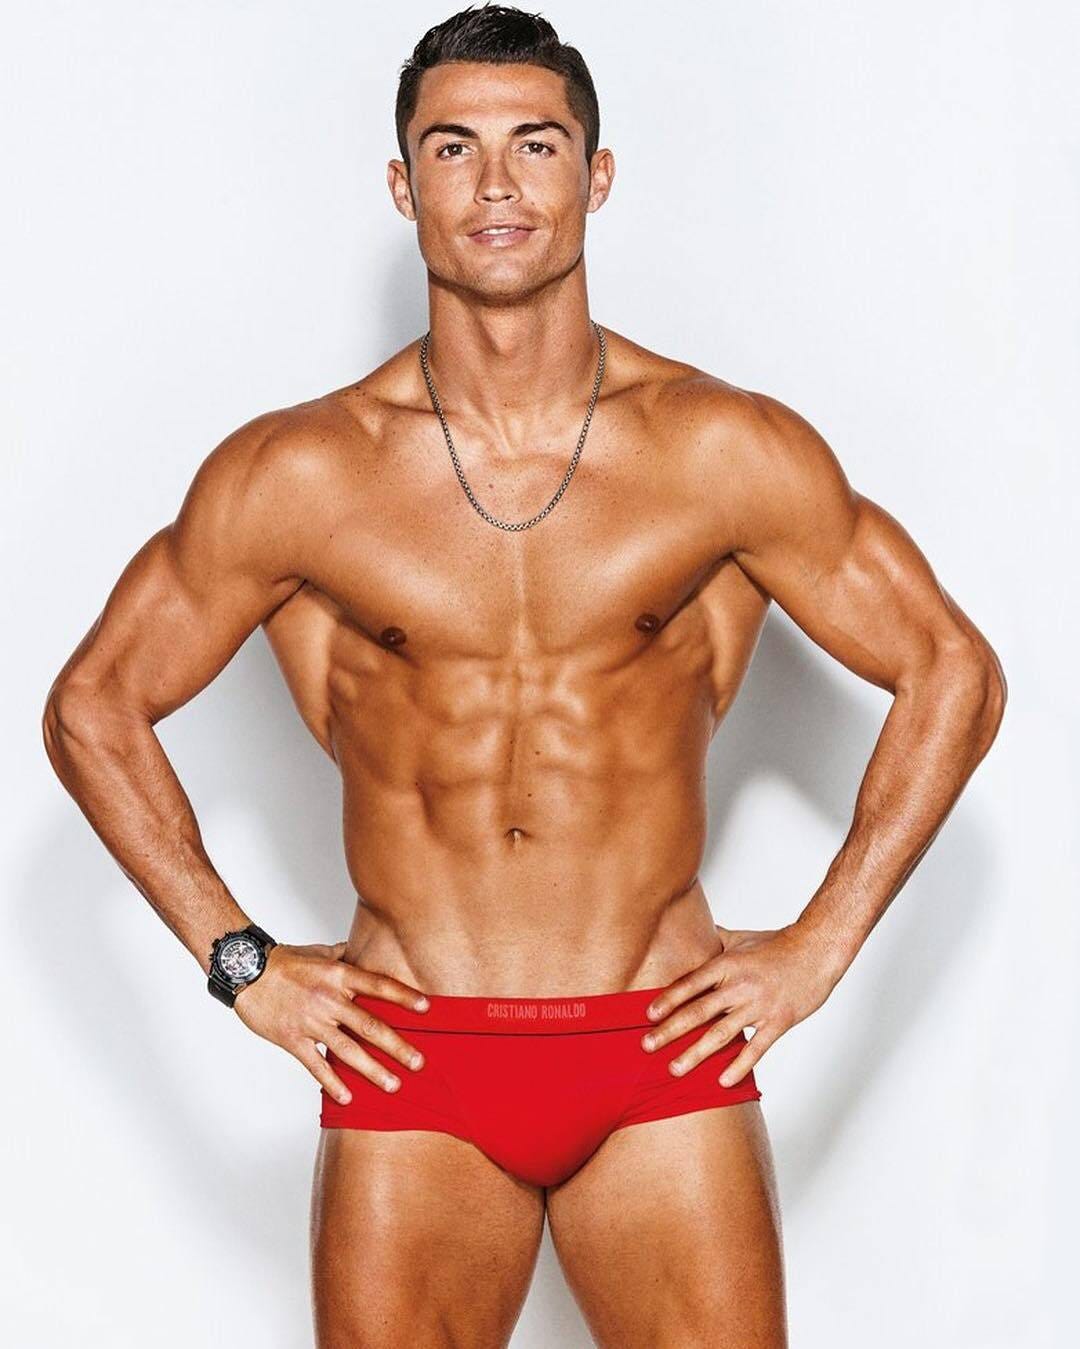 What to Wear Today: A new pair of lucky Cristiano Ronaldo underwear. | by I  Blog In Jordans | I BLOG IN JORDANS | Medium